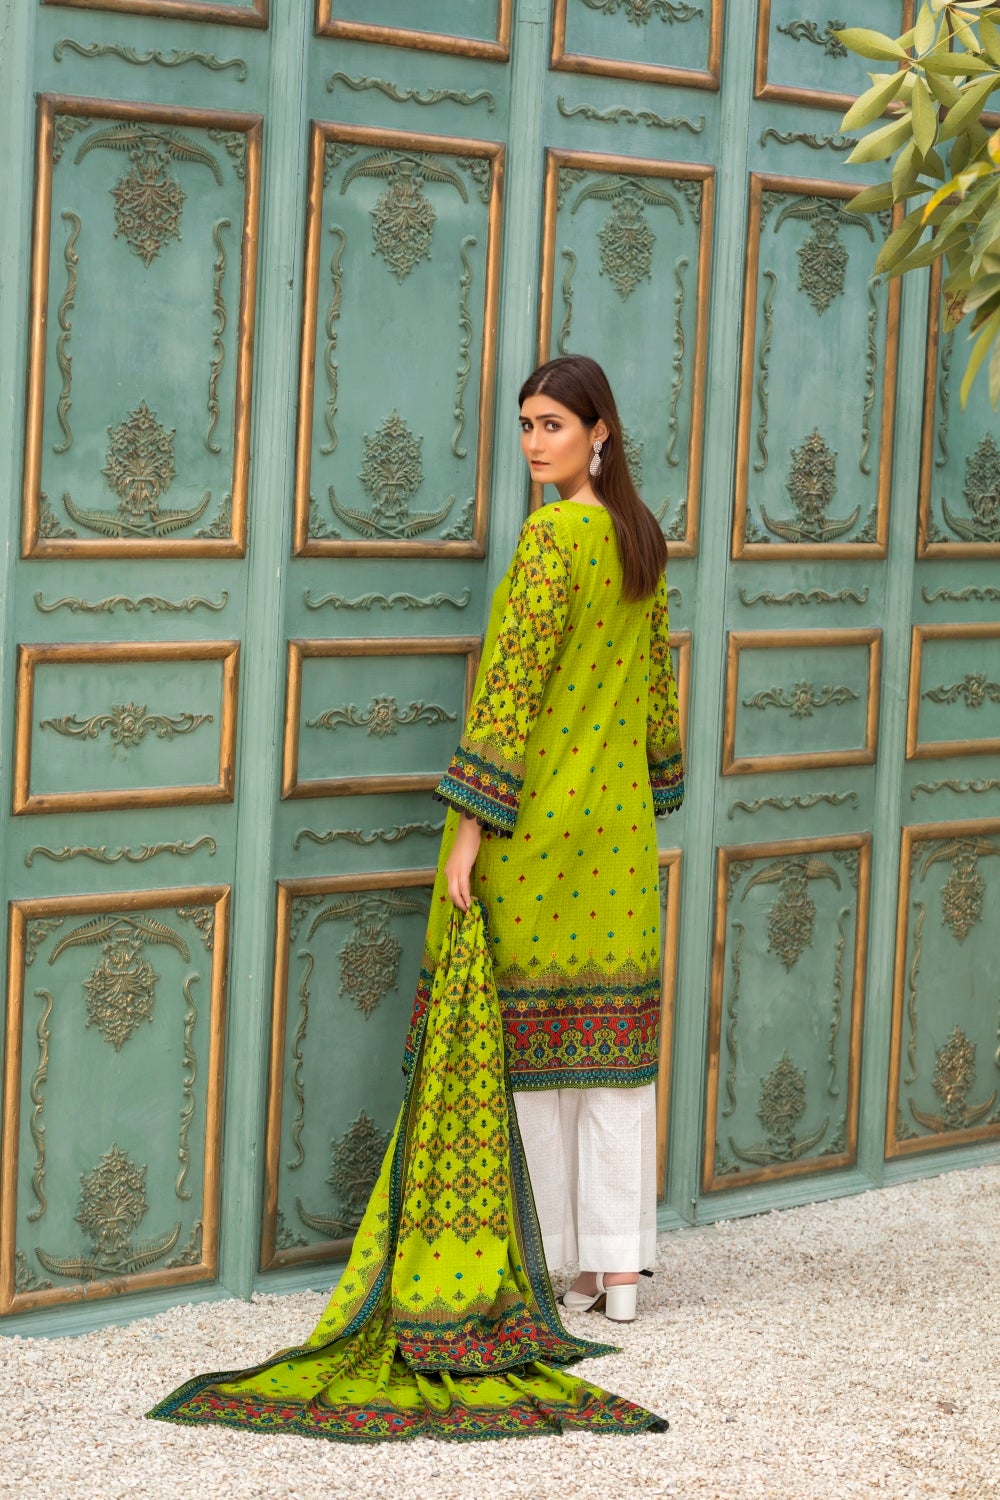 Ittehad Crystal Printed Lawn Unstitched 3 Piece Suit - LF-CL-21140B - Summer Collection